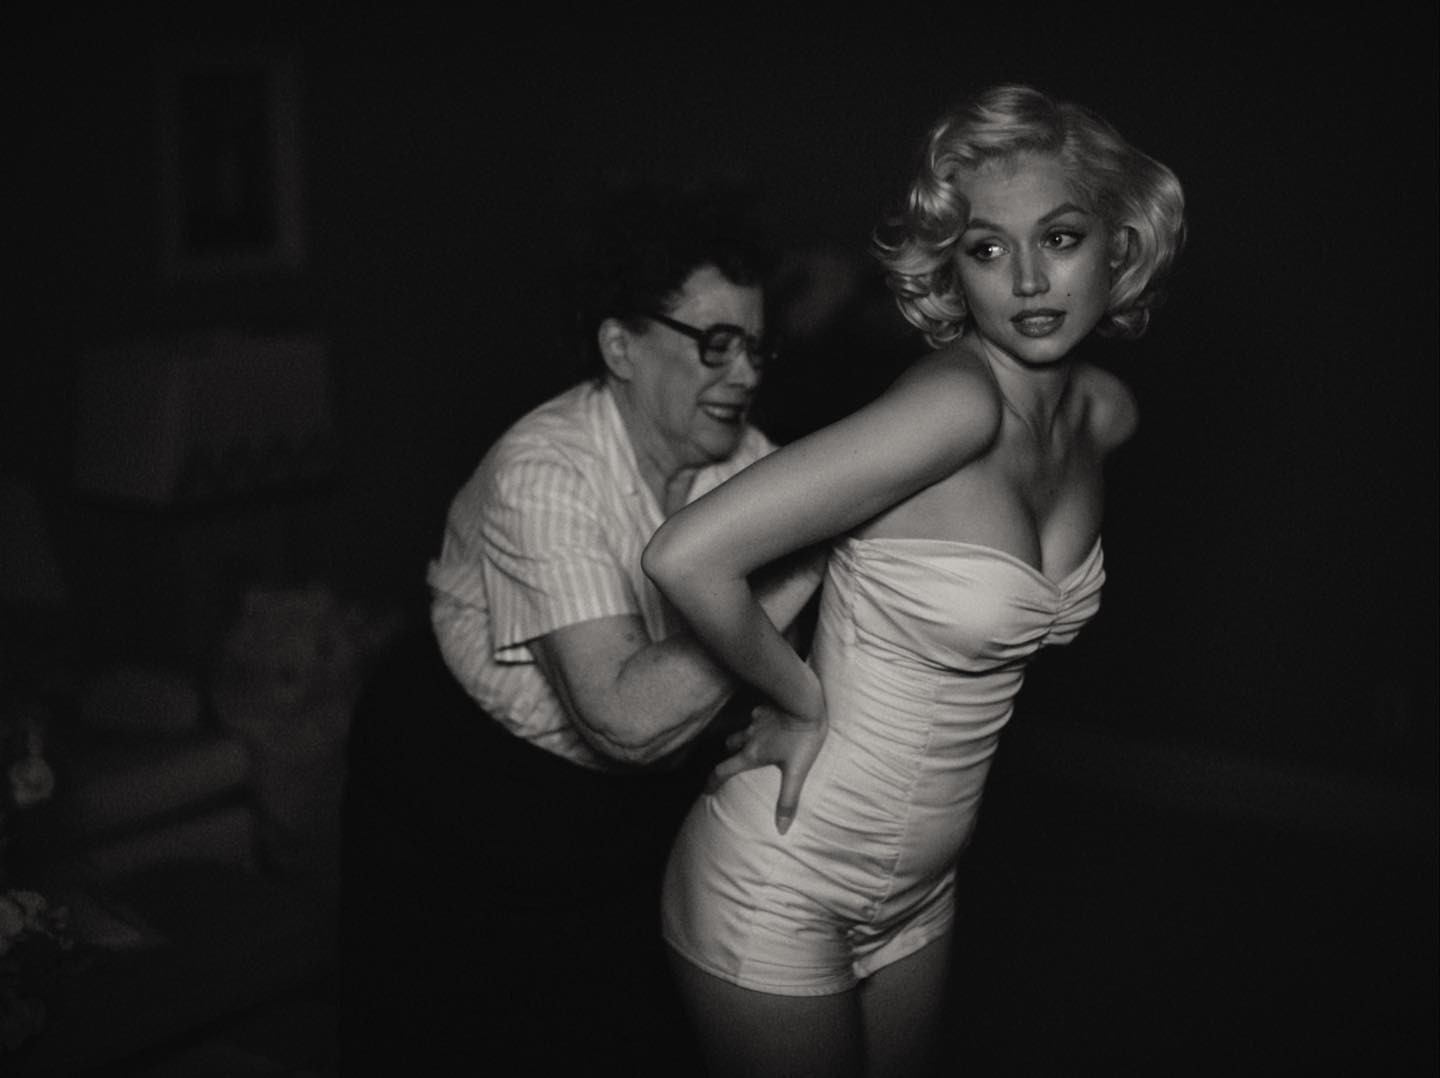 Ana de Armas surprises in photos characterized as Marilyn Monroe for the film (Photo: Reproduction / Instagram)